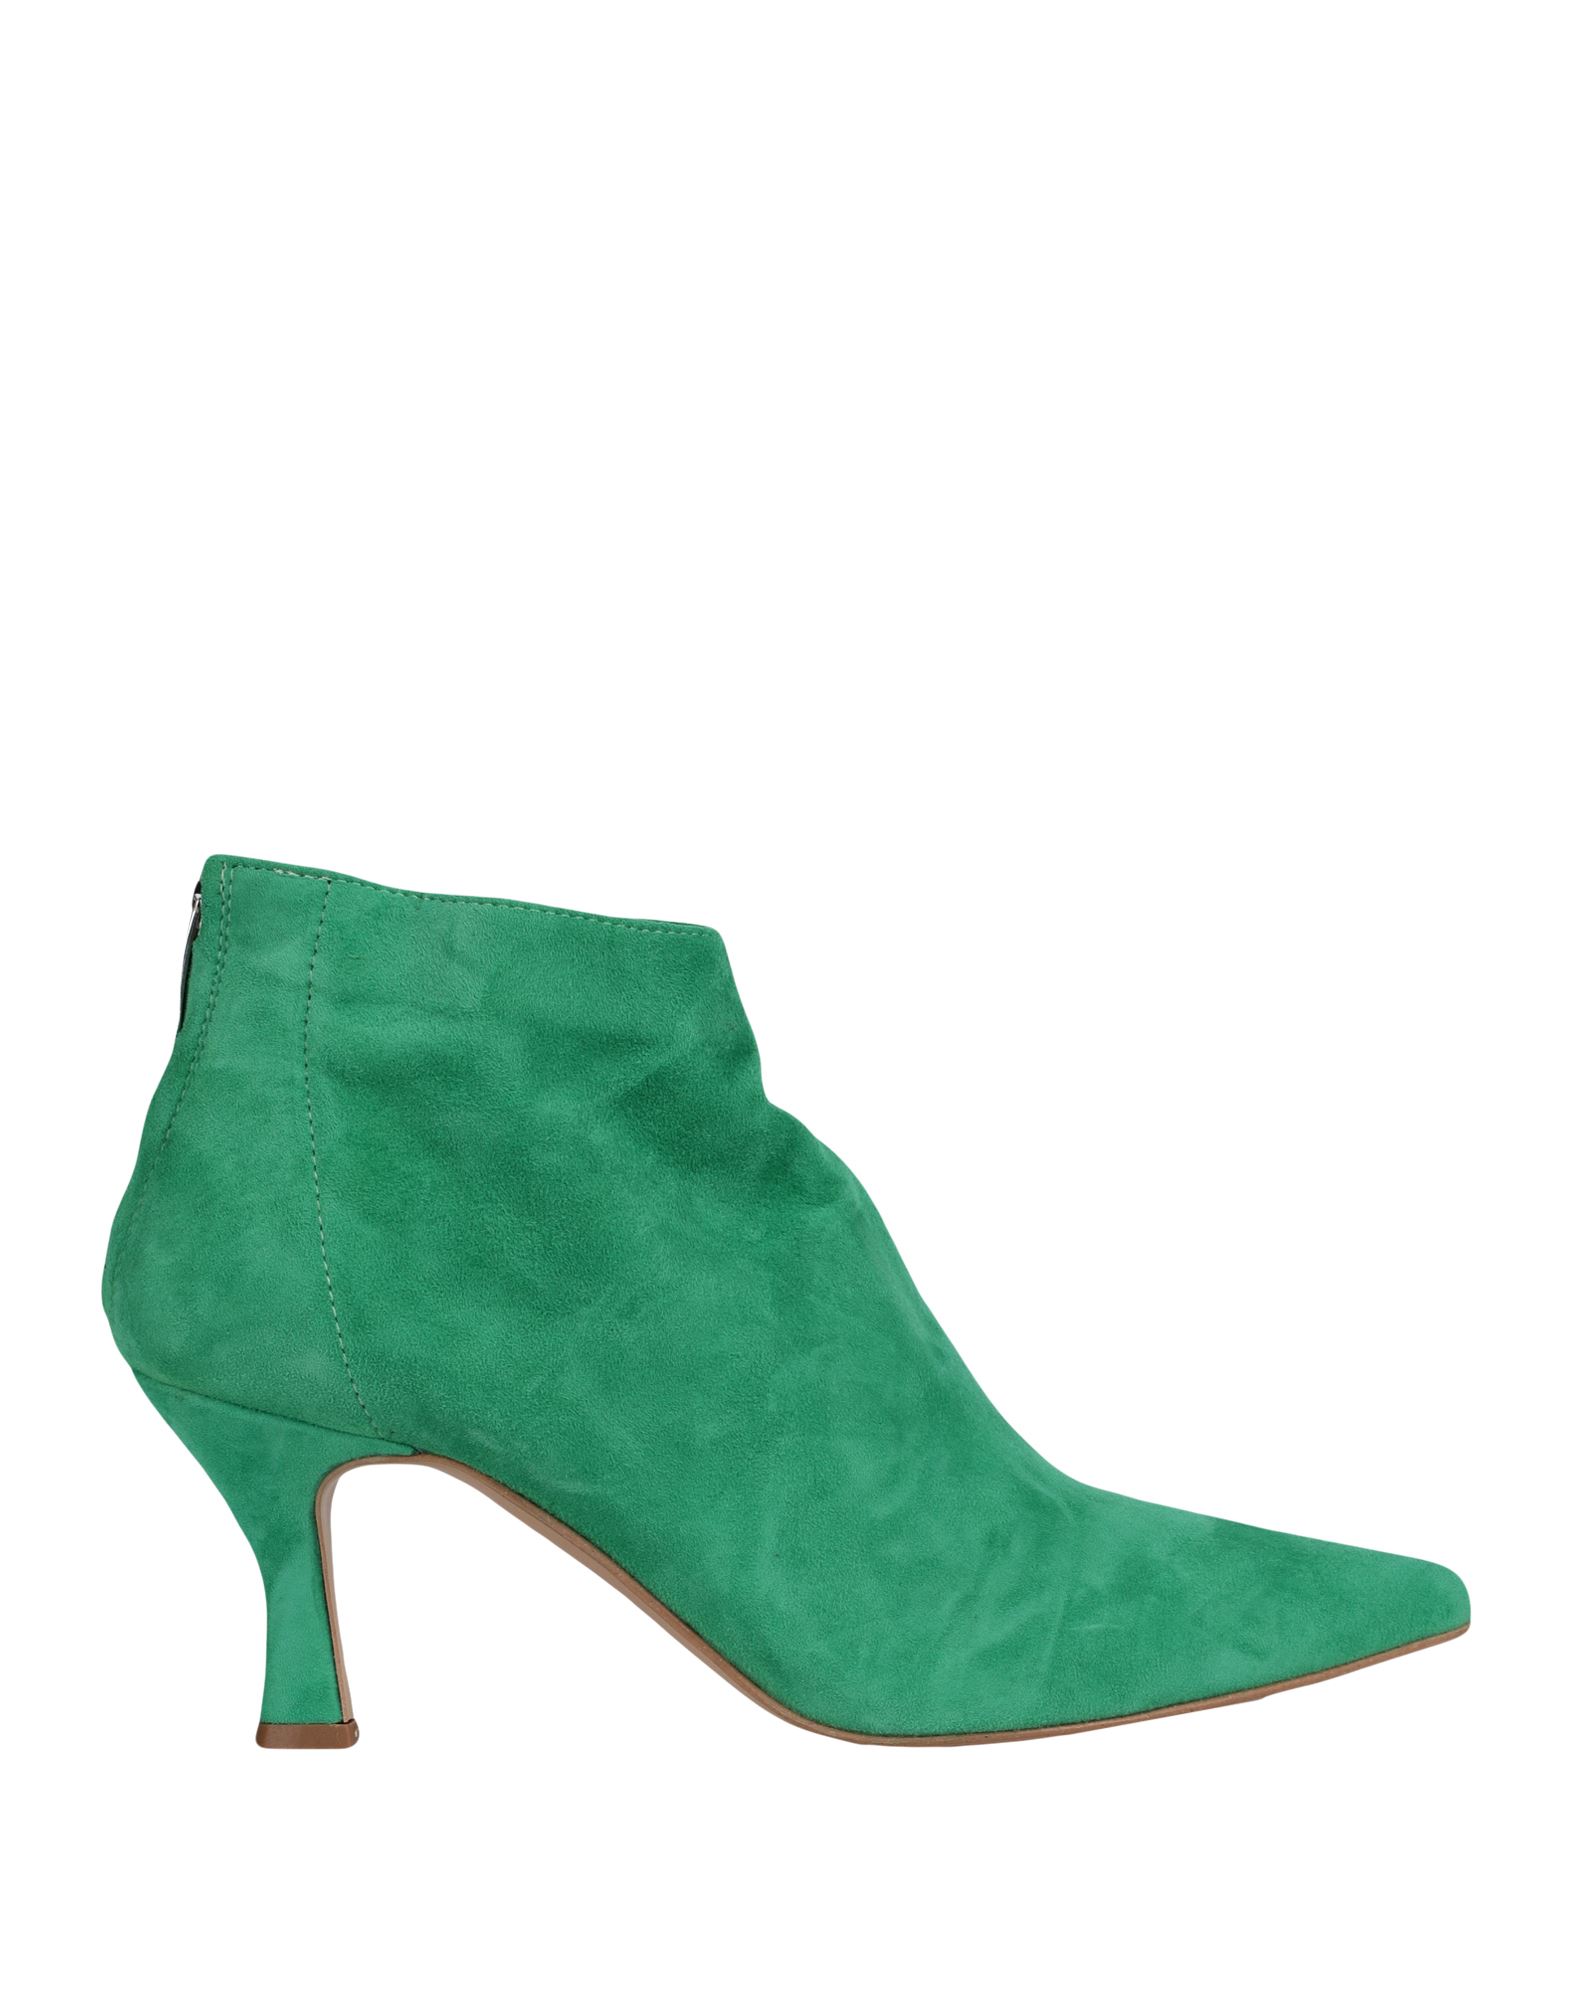 Ovye' By Cristina Lucchi Woman Ankle Boots Green Size 9 Soft Leather